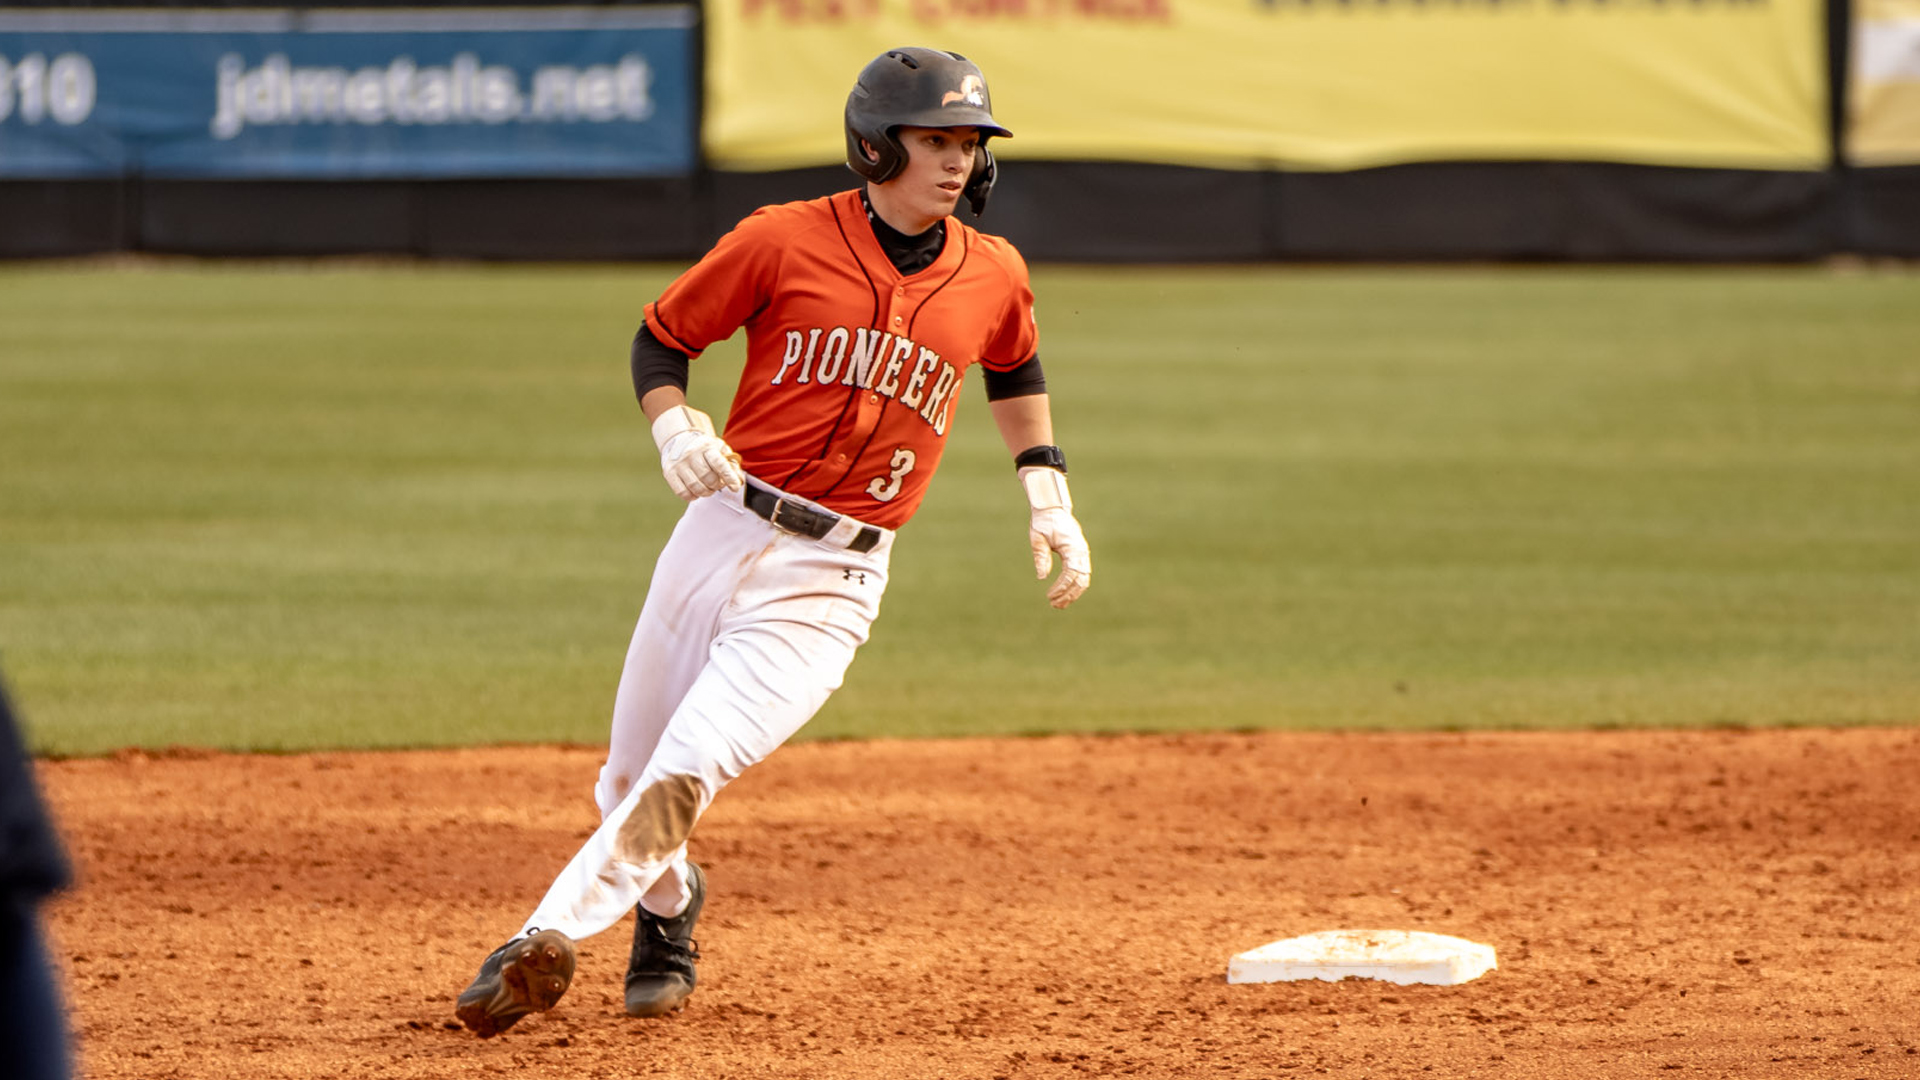 Zach Wilson went 4-for-5 with a double and two RBI in Tusculum's 9-4 win over King (photo by Kari Ham).